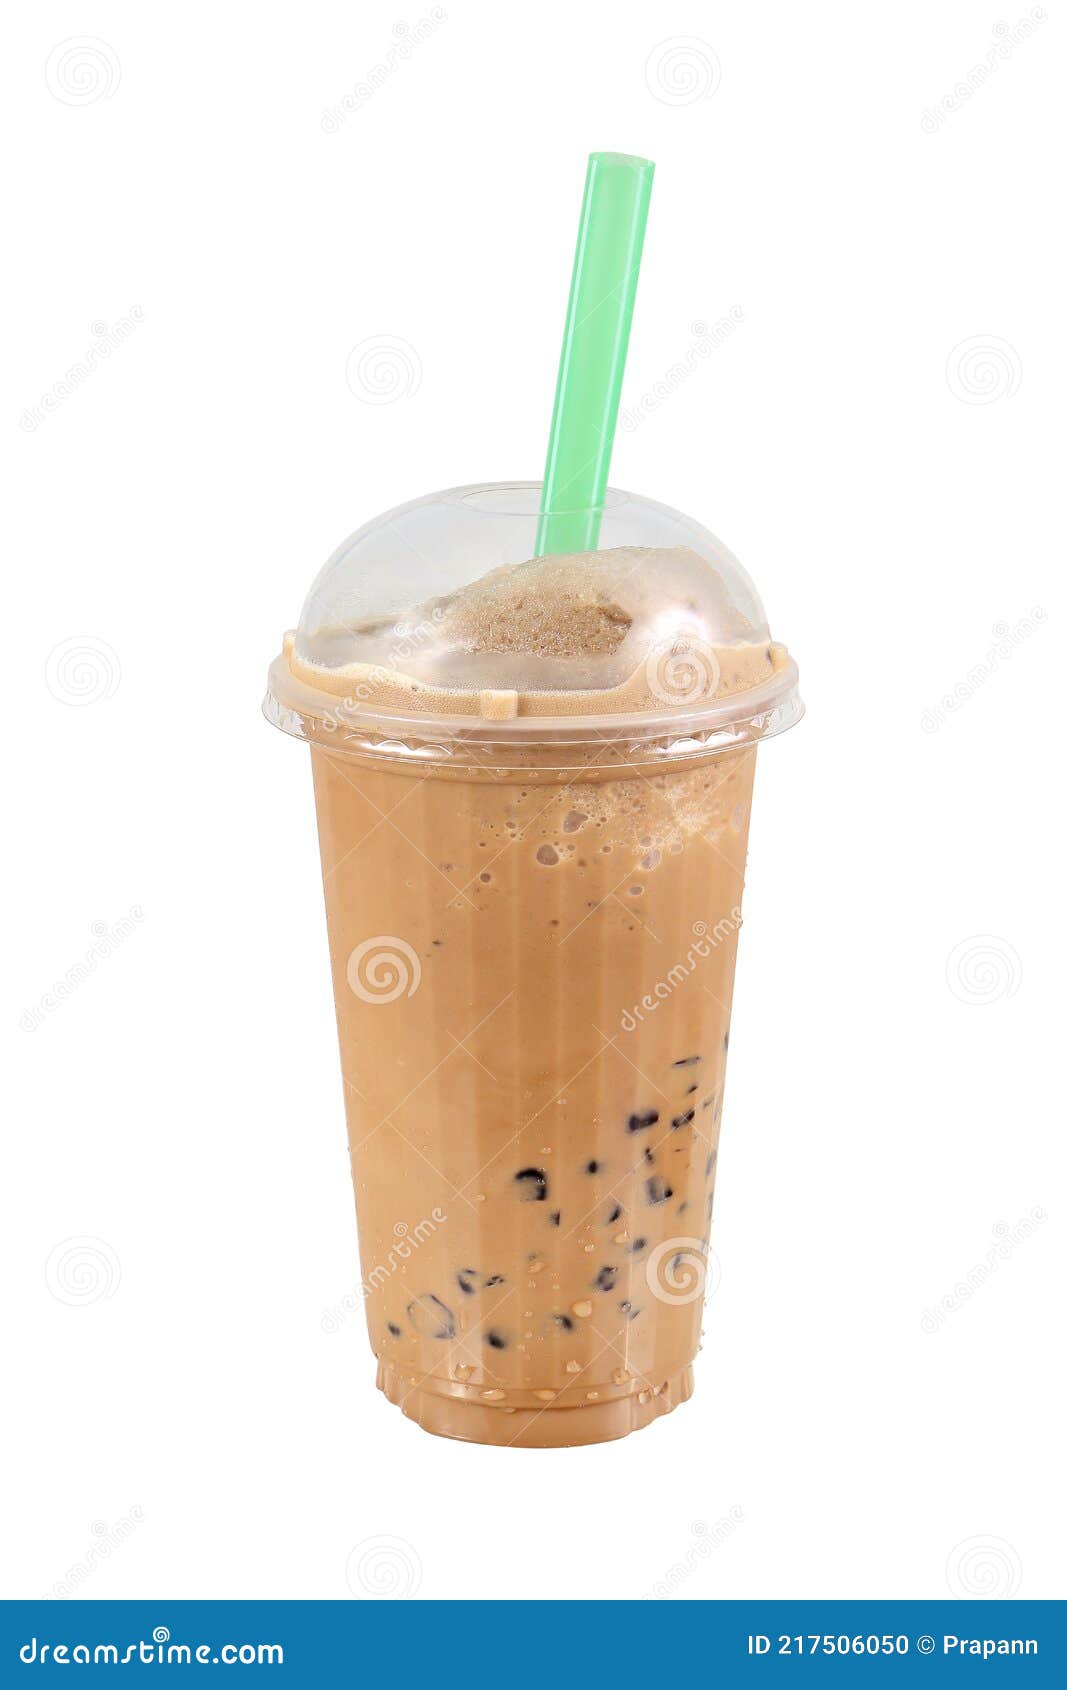 https://thumbs.dreamstime.com/z/iced-coffee-plastic-cup-isolated-white-background-217506050.jpg